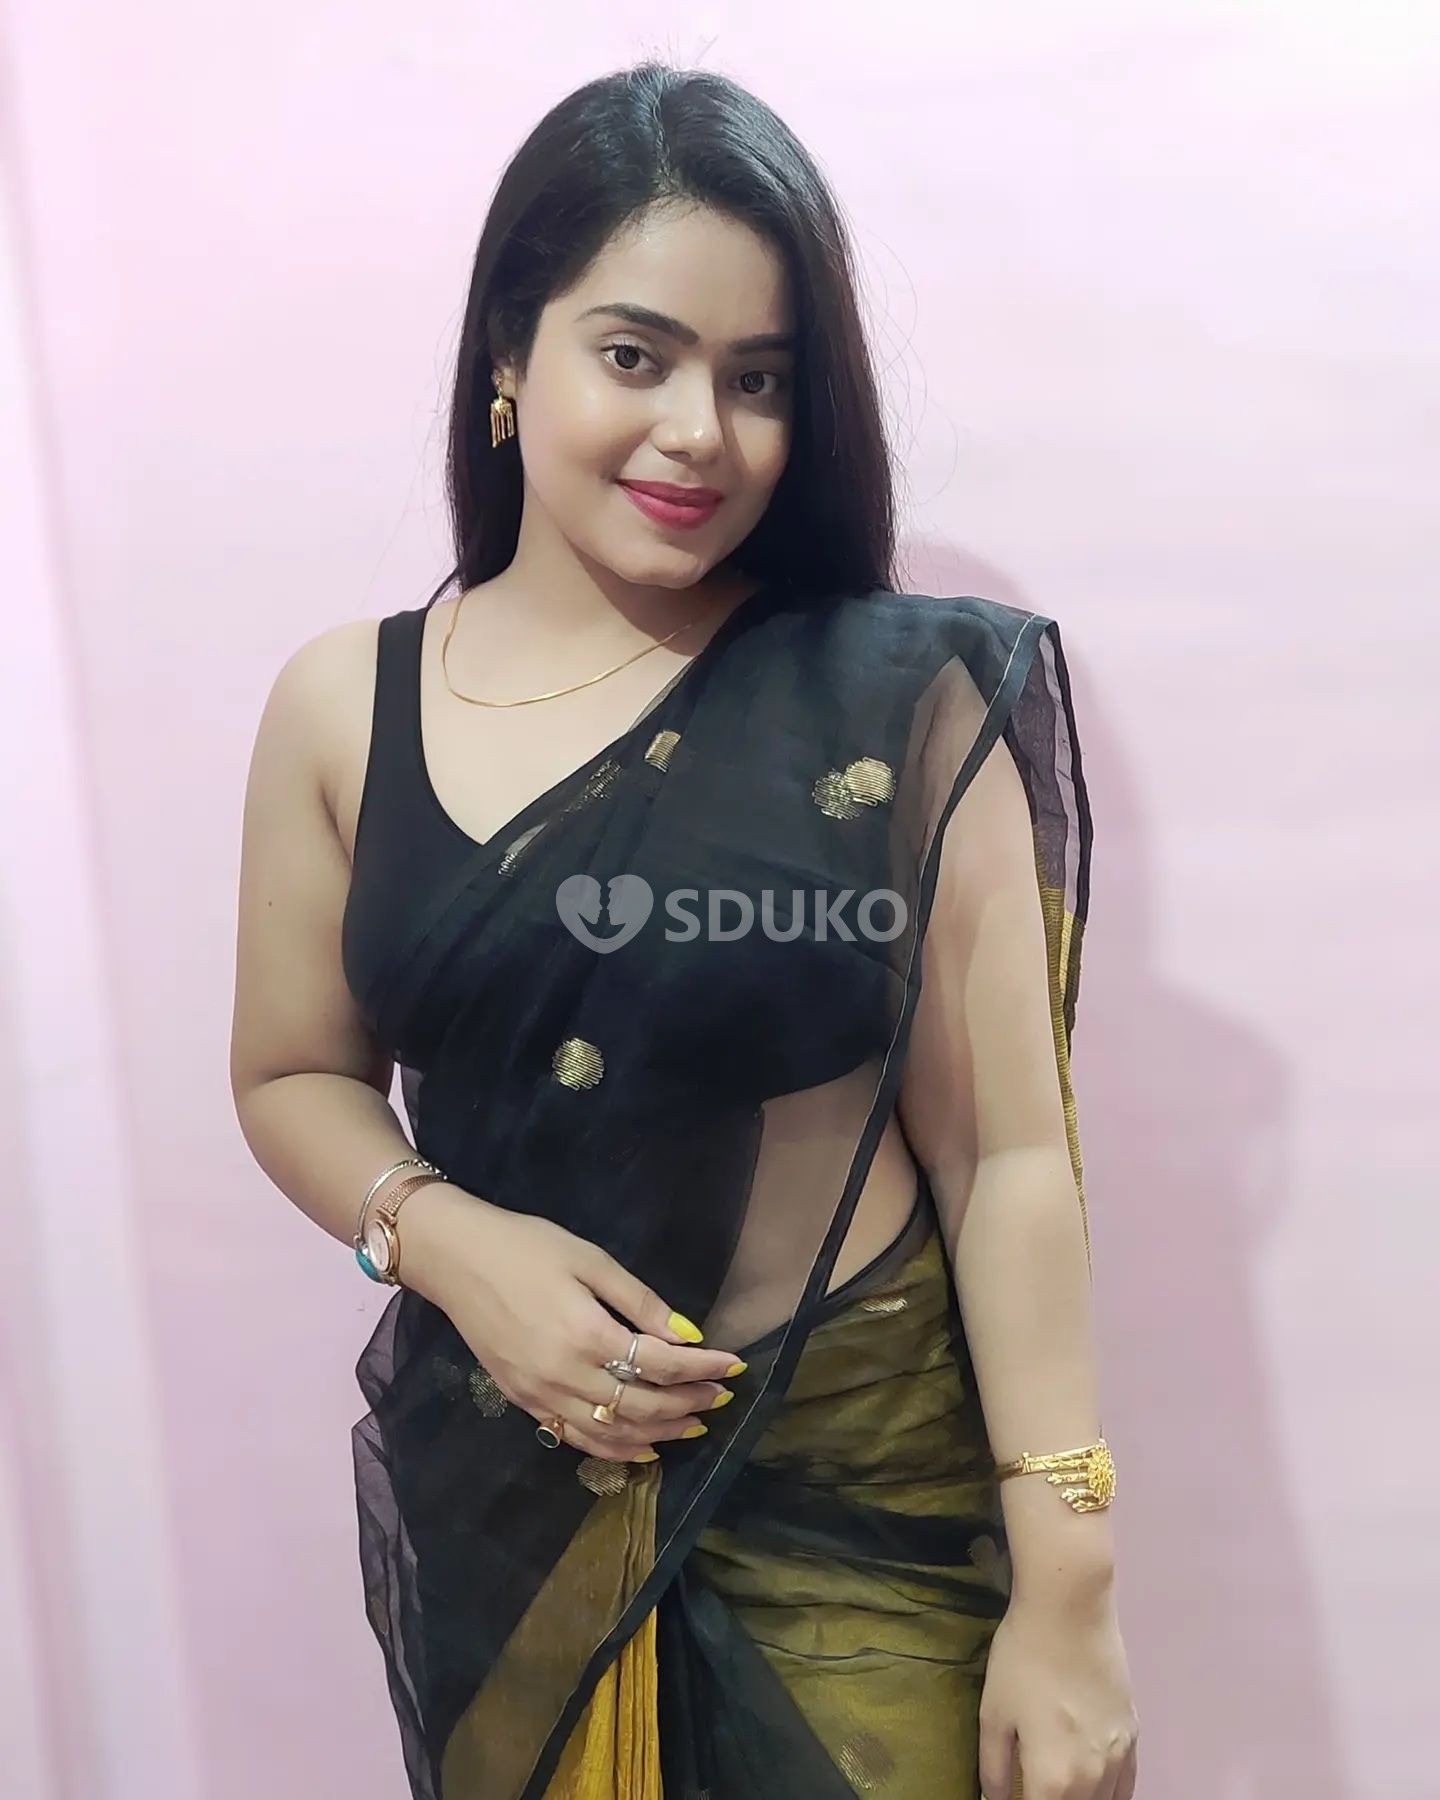 AMEERPET 💯% SAFE AND SECURE TODAY LOW PRICE UNLIMITED ENJOY HOT COLLEGE GIRL HOUSEWIFE AUNTIES AVAILABLE.. ...